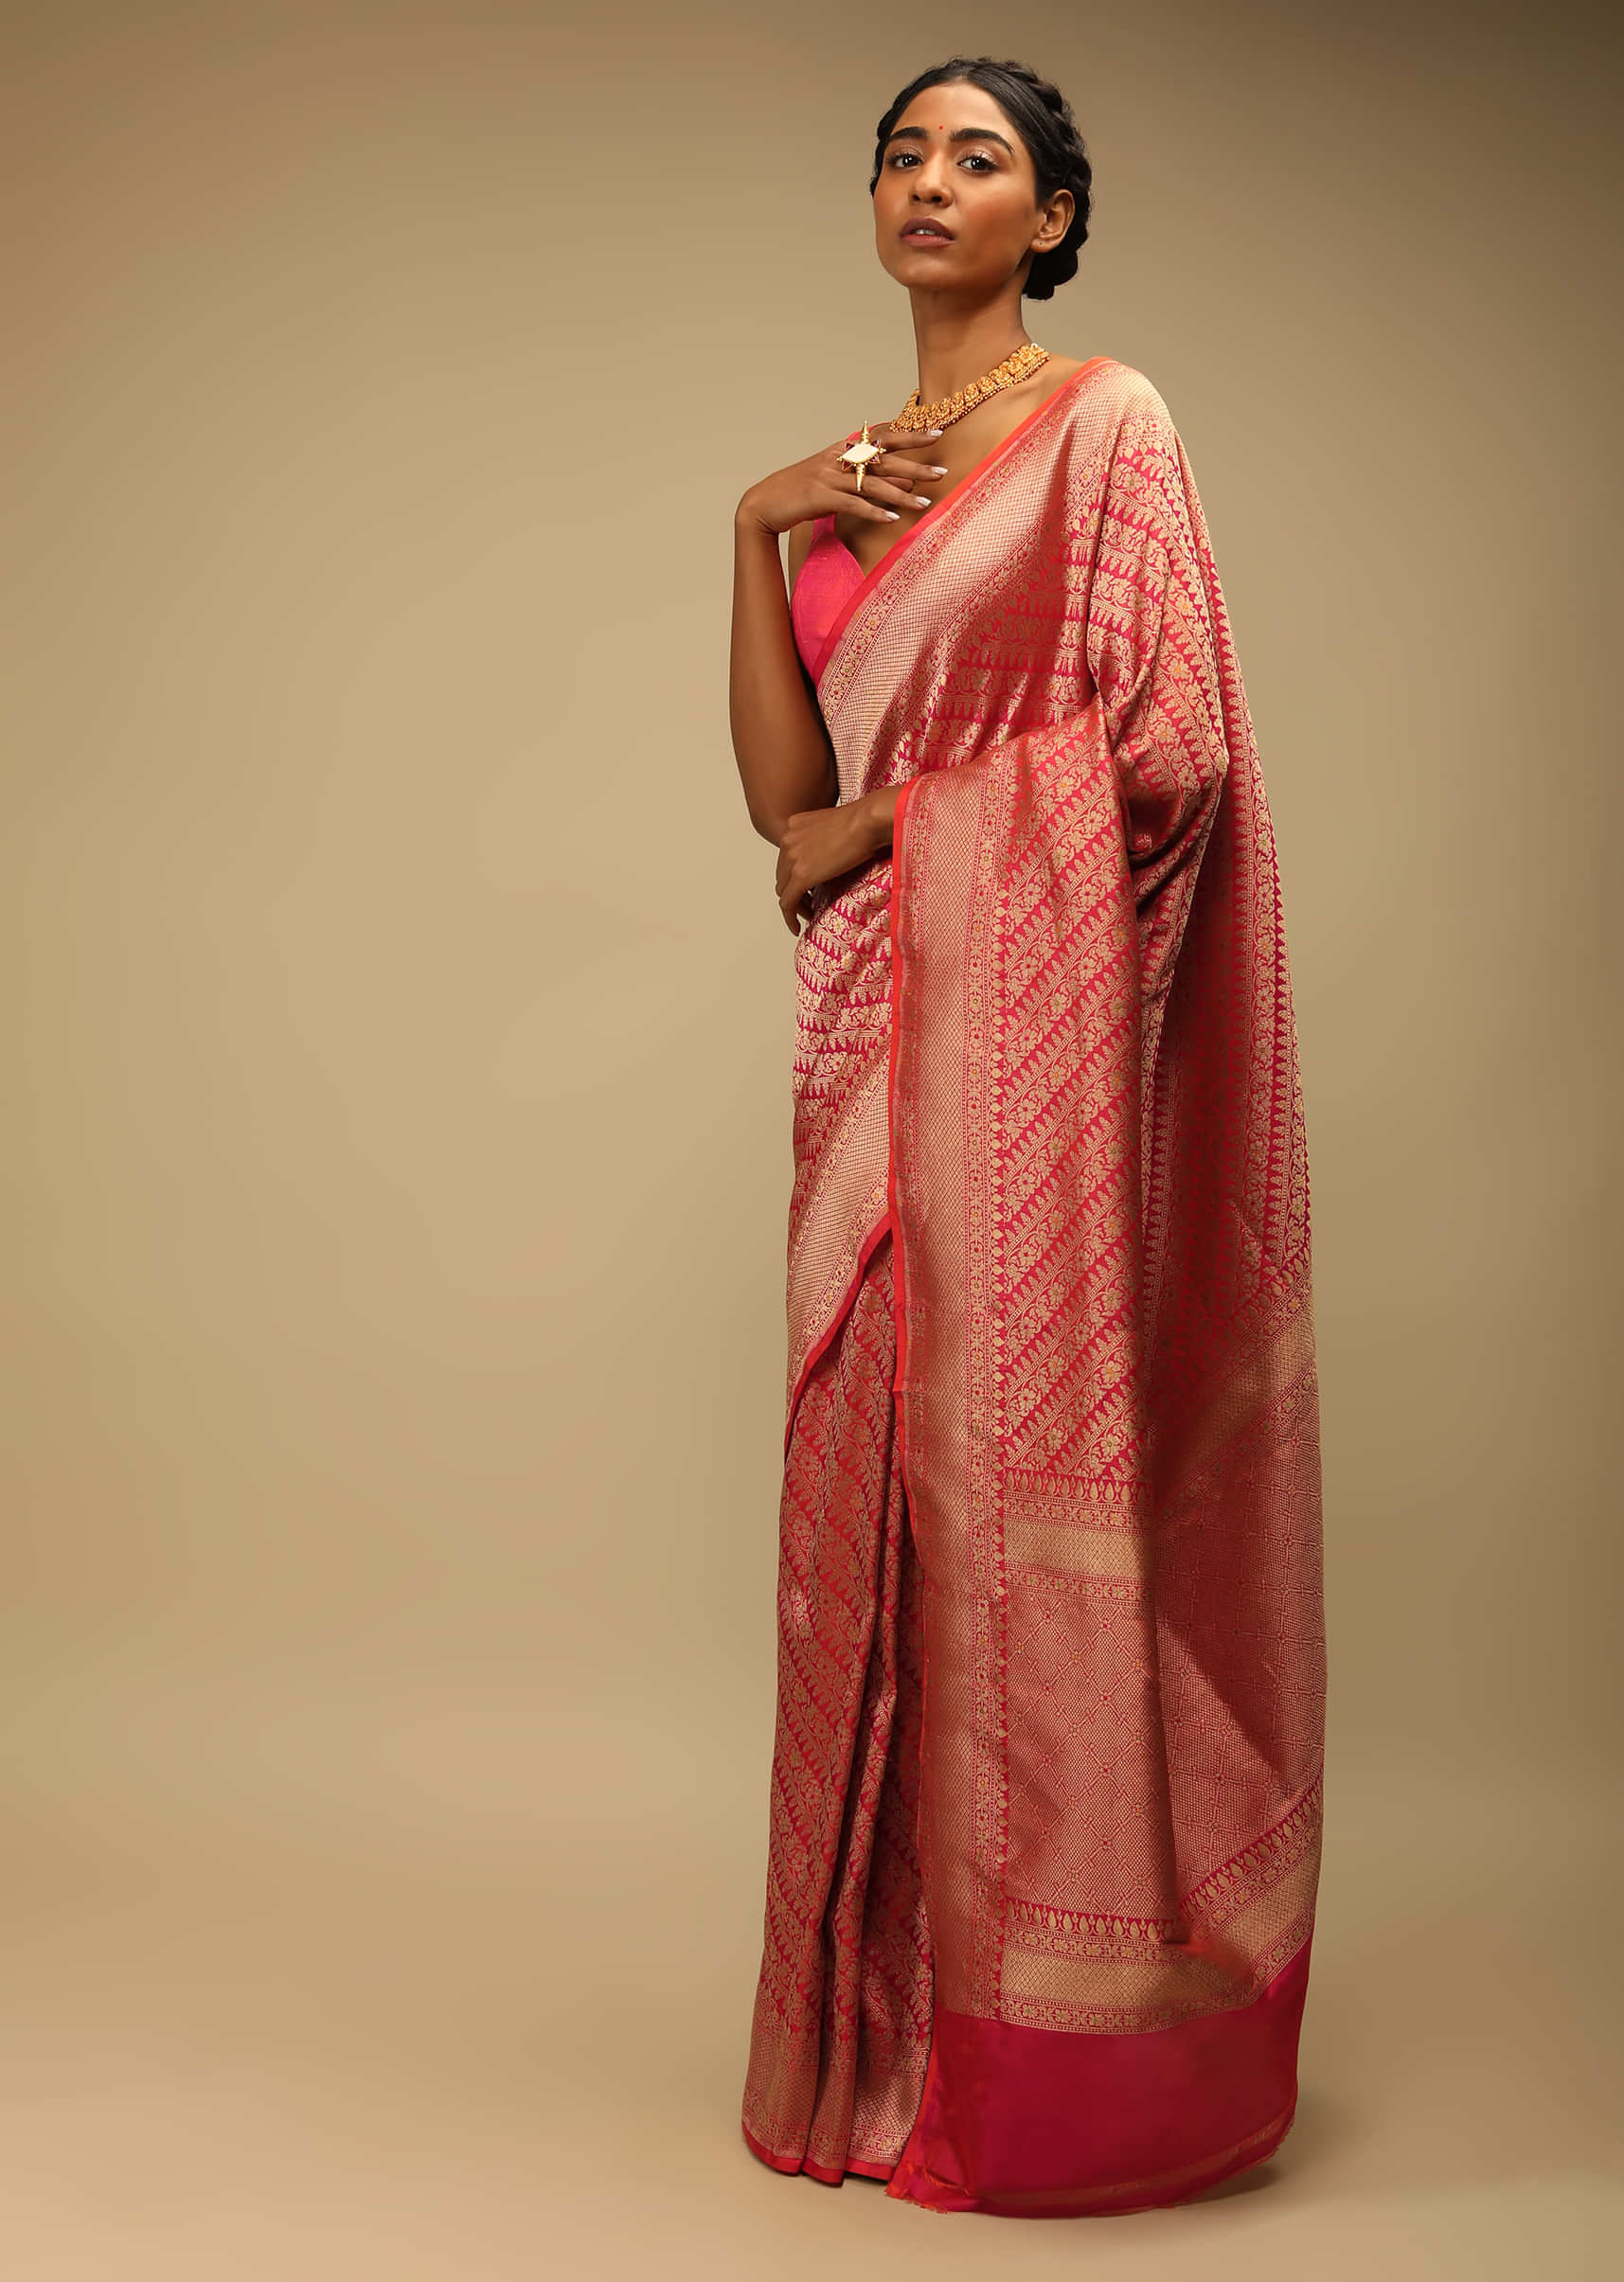 Coral Two Toned Saree In Pure Handloom Silk With Woven Floral Design In Diagonal Pattern 